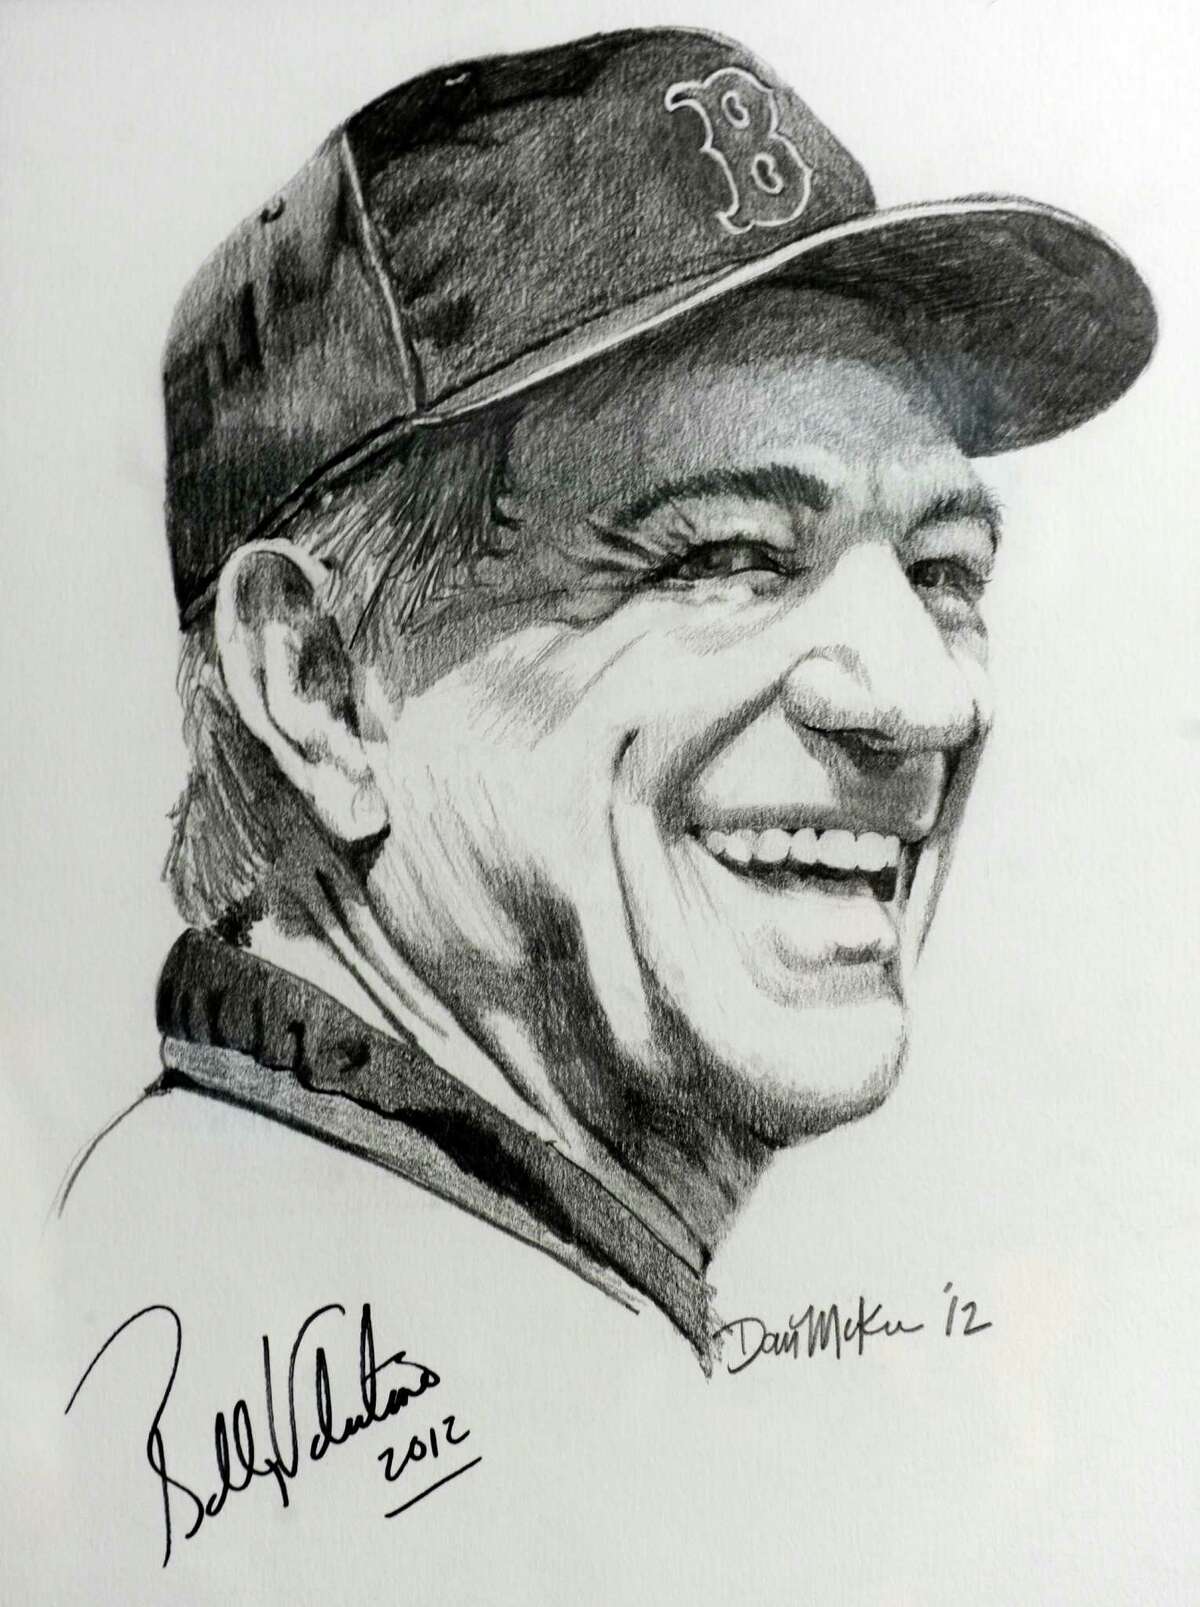 This is a drawing of Bobby Valentine when he was manager of the Boston Red Sox, done by Dan McKee, owner of Designs and Signs in Brookfield, Conn.